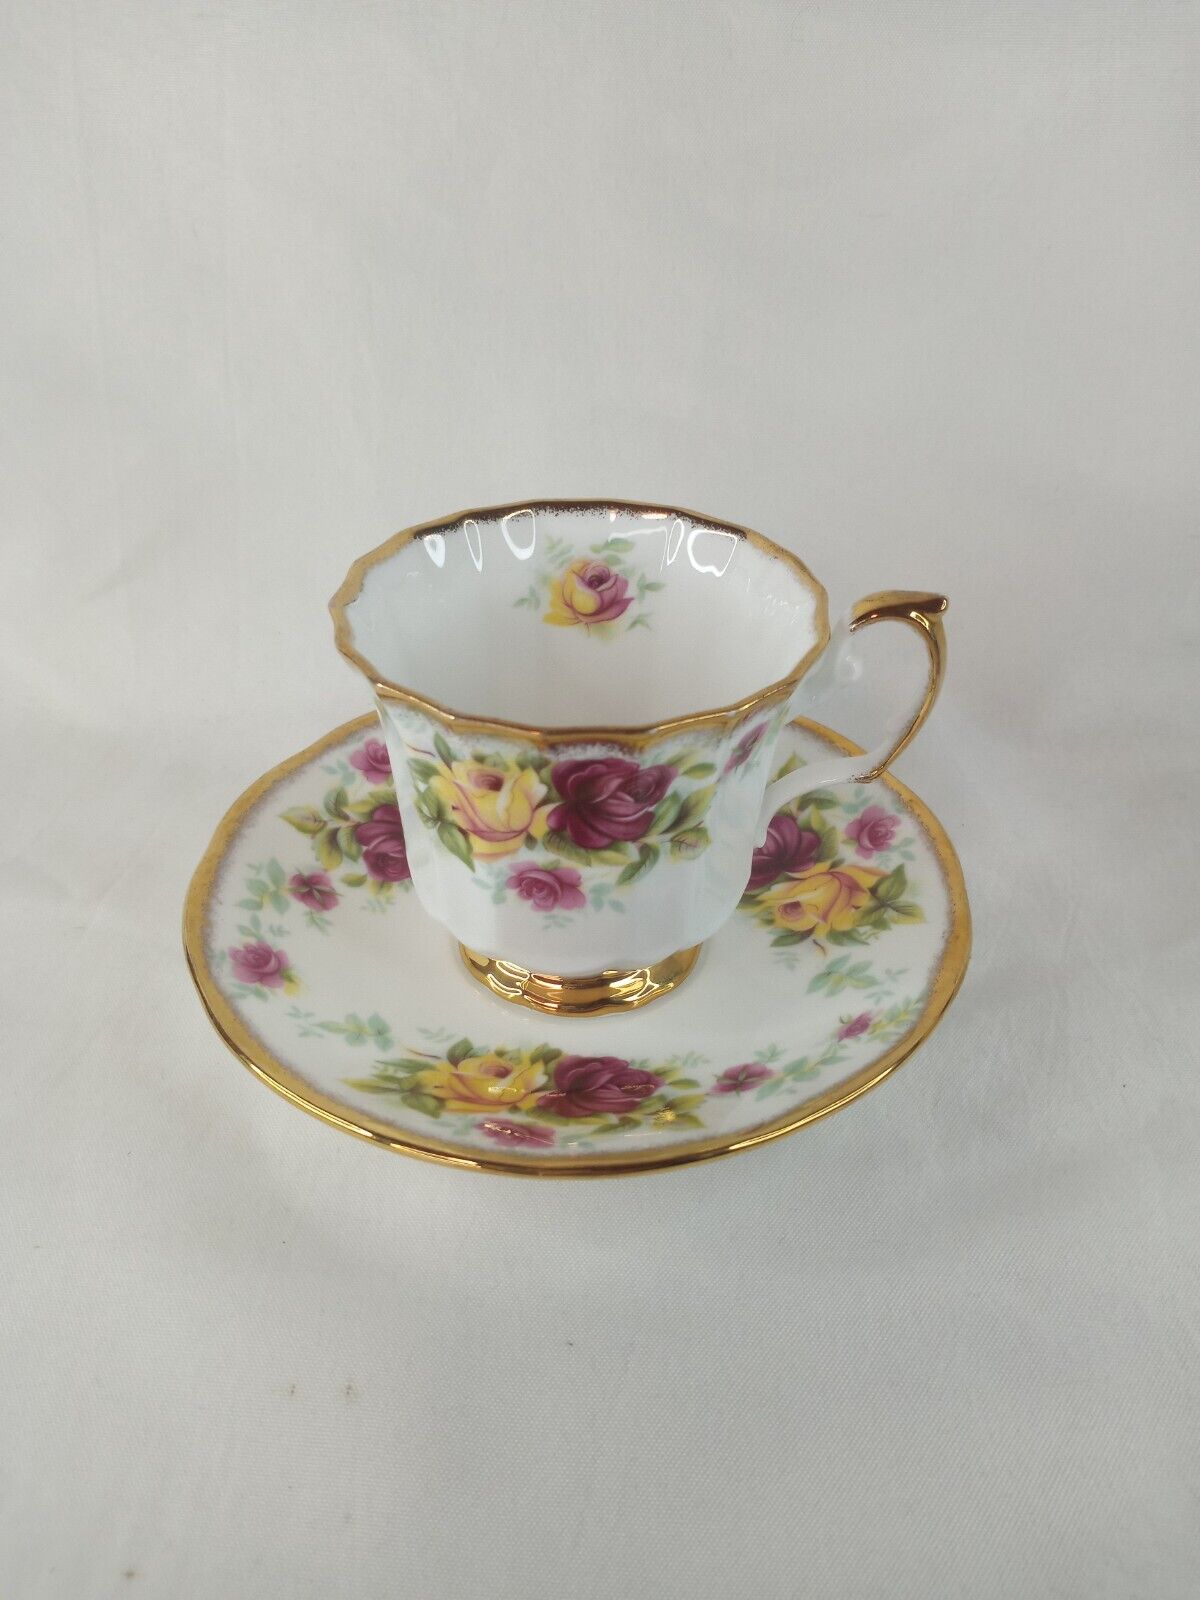 Crownford of England Queen's China Bone China Tea Cup and Saucer Jacobean Roses